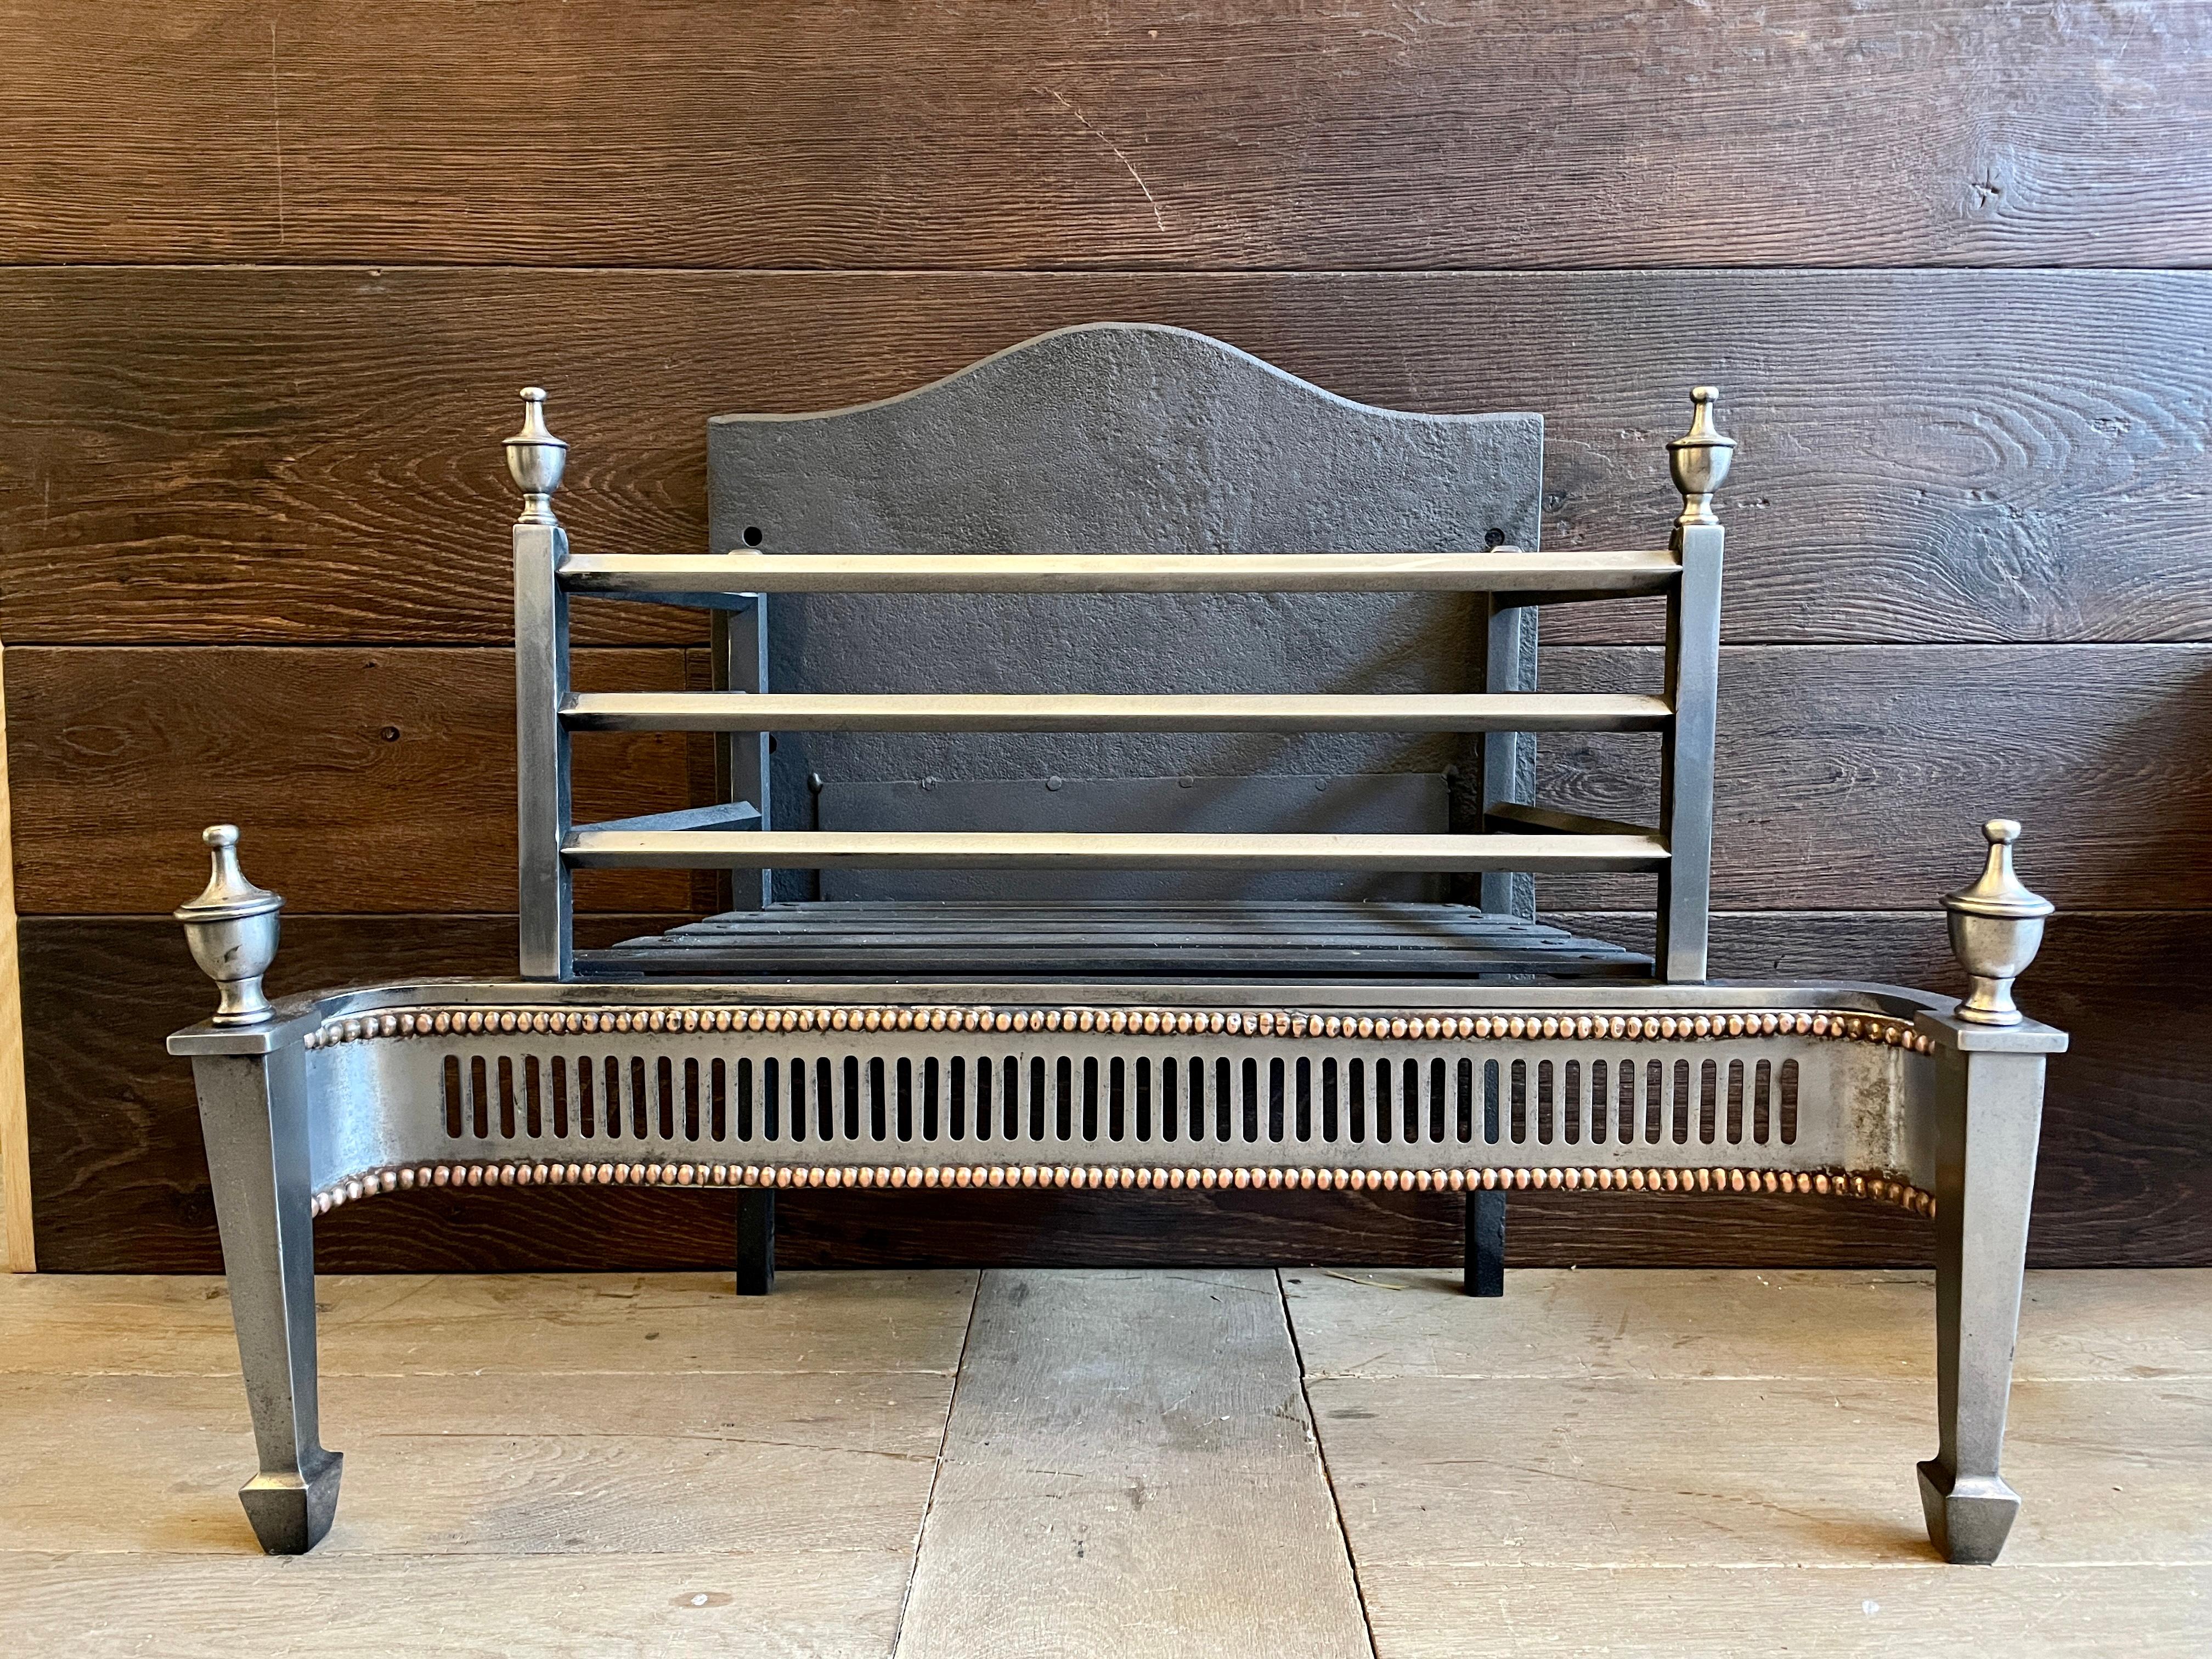 An unusual Steel George II style fire grate or Dog grate. The cut steel fret edged with Gun metal beading, tapering front legs with shaped feet surmounted by finials. The railed burning area open on 3 sides with a shaped cast iron back.
Front